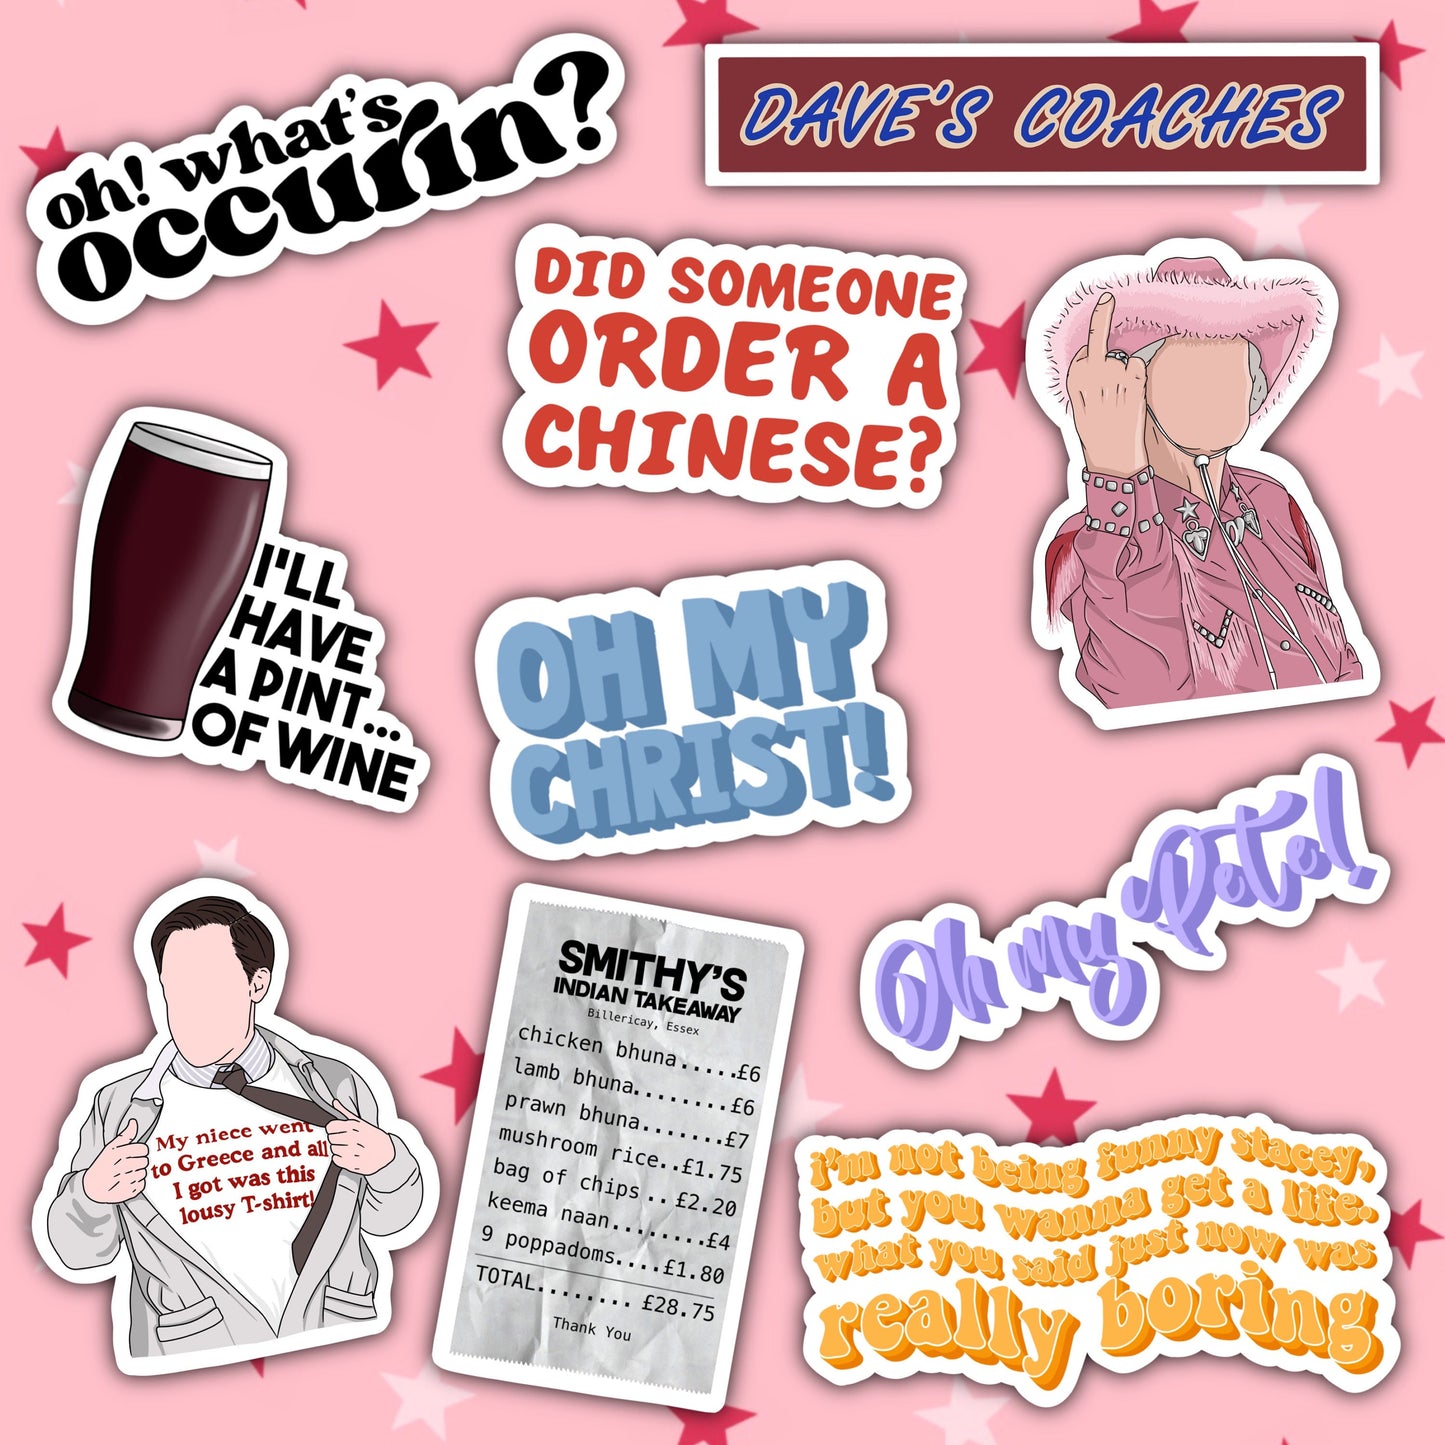 Did Someone Order a Chinese? | Chinese Alan | Gavin and Stacey Stickers